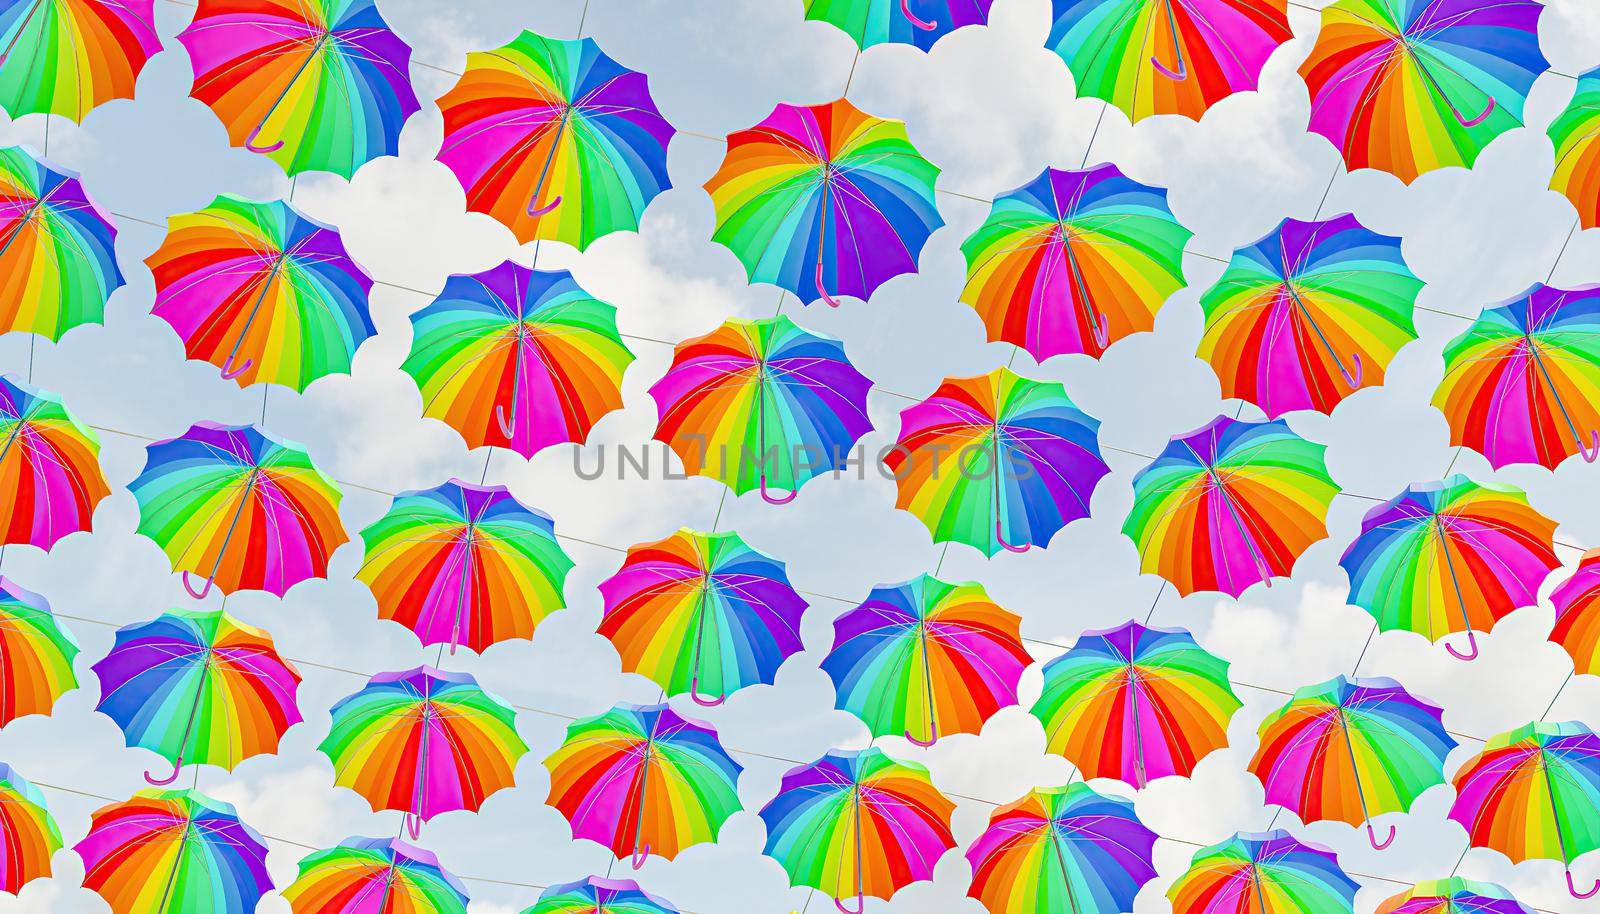 3d rendering of umbrellas hanging in the street with the LGTB flag.